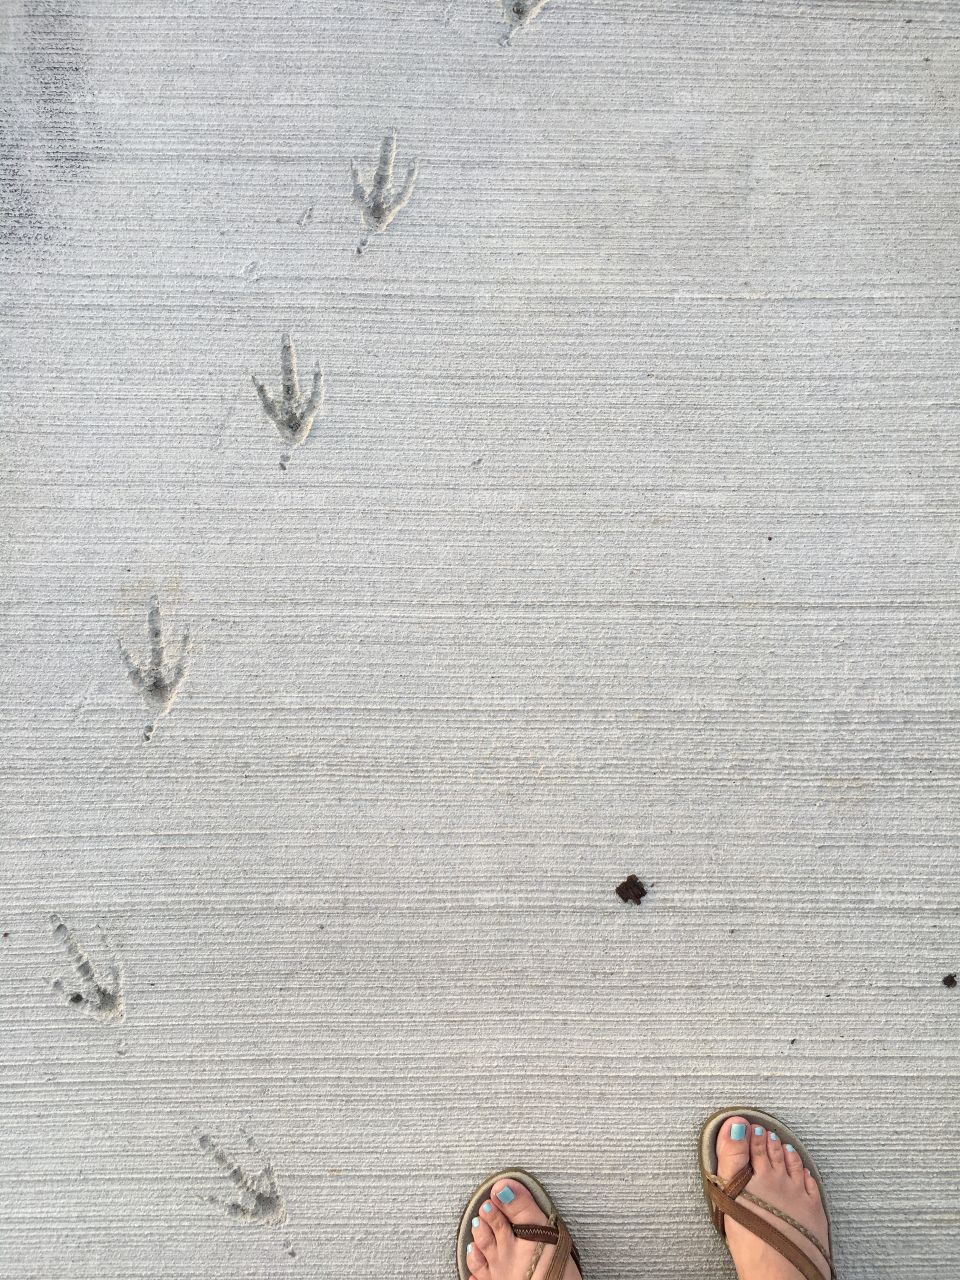 Bird prints and my feet at the park in Ohio 